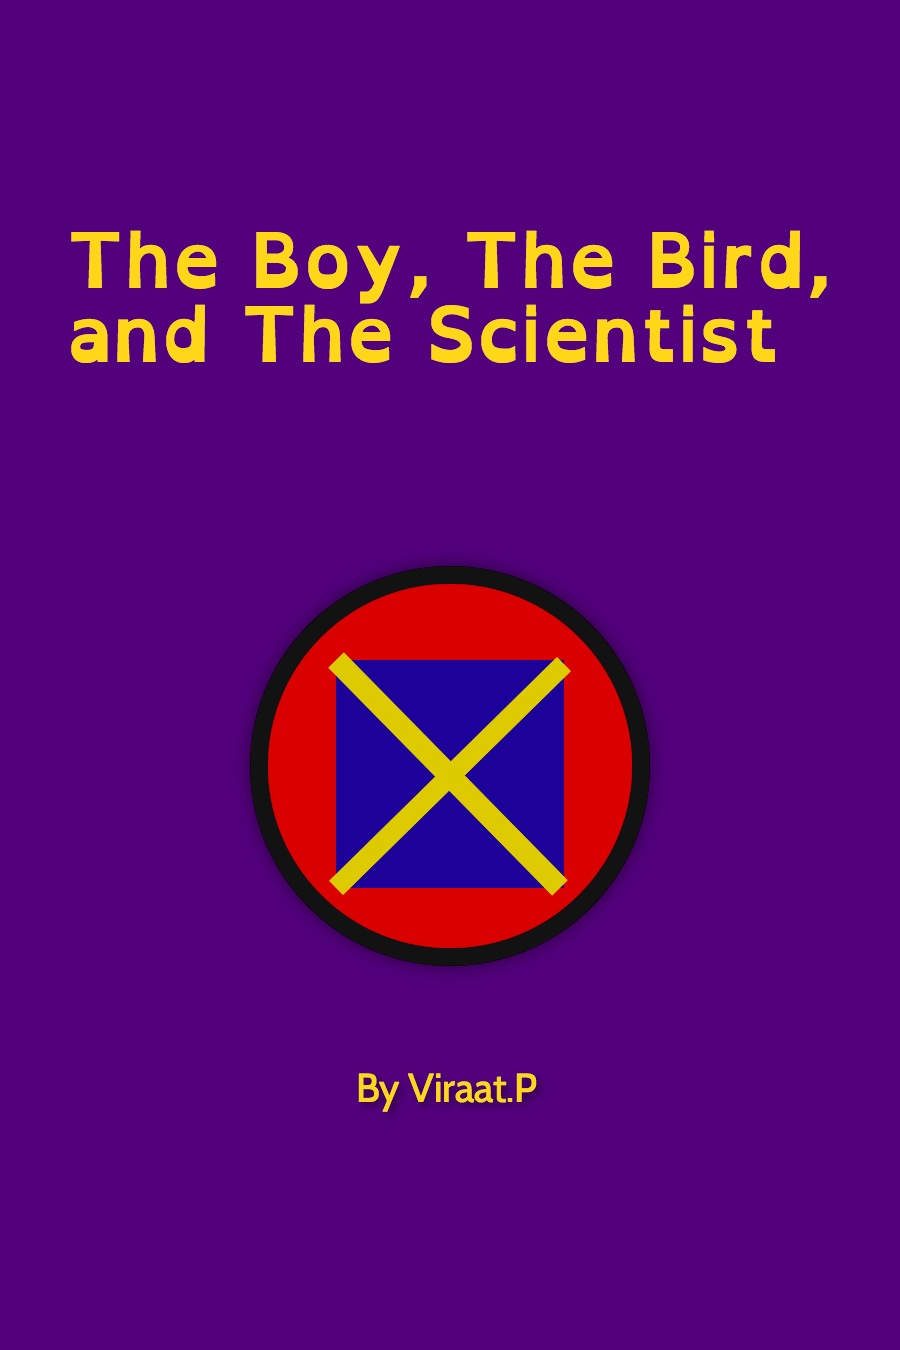 The Boy, The Bird, and The Scientist by Viraat P